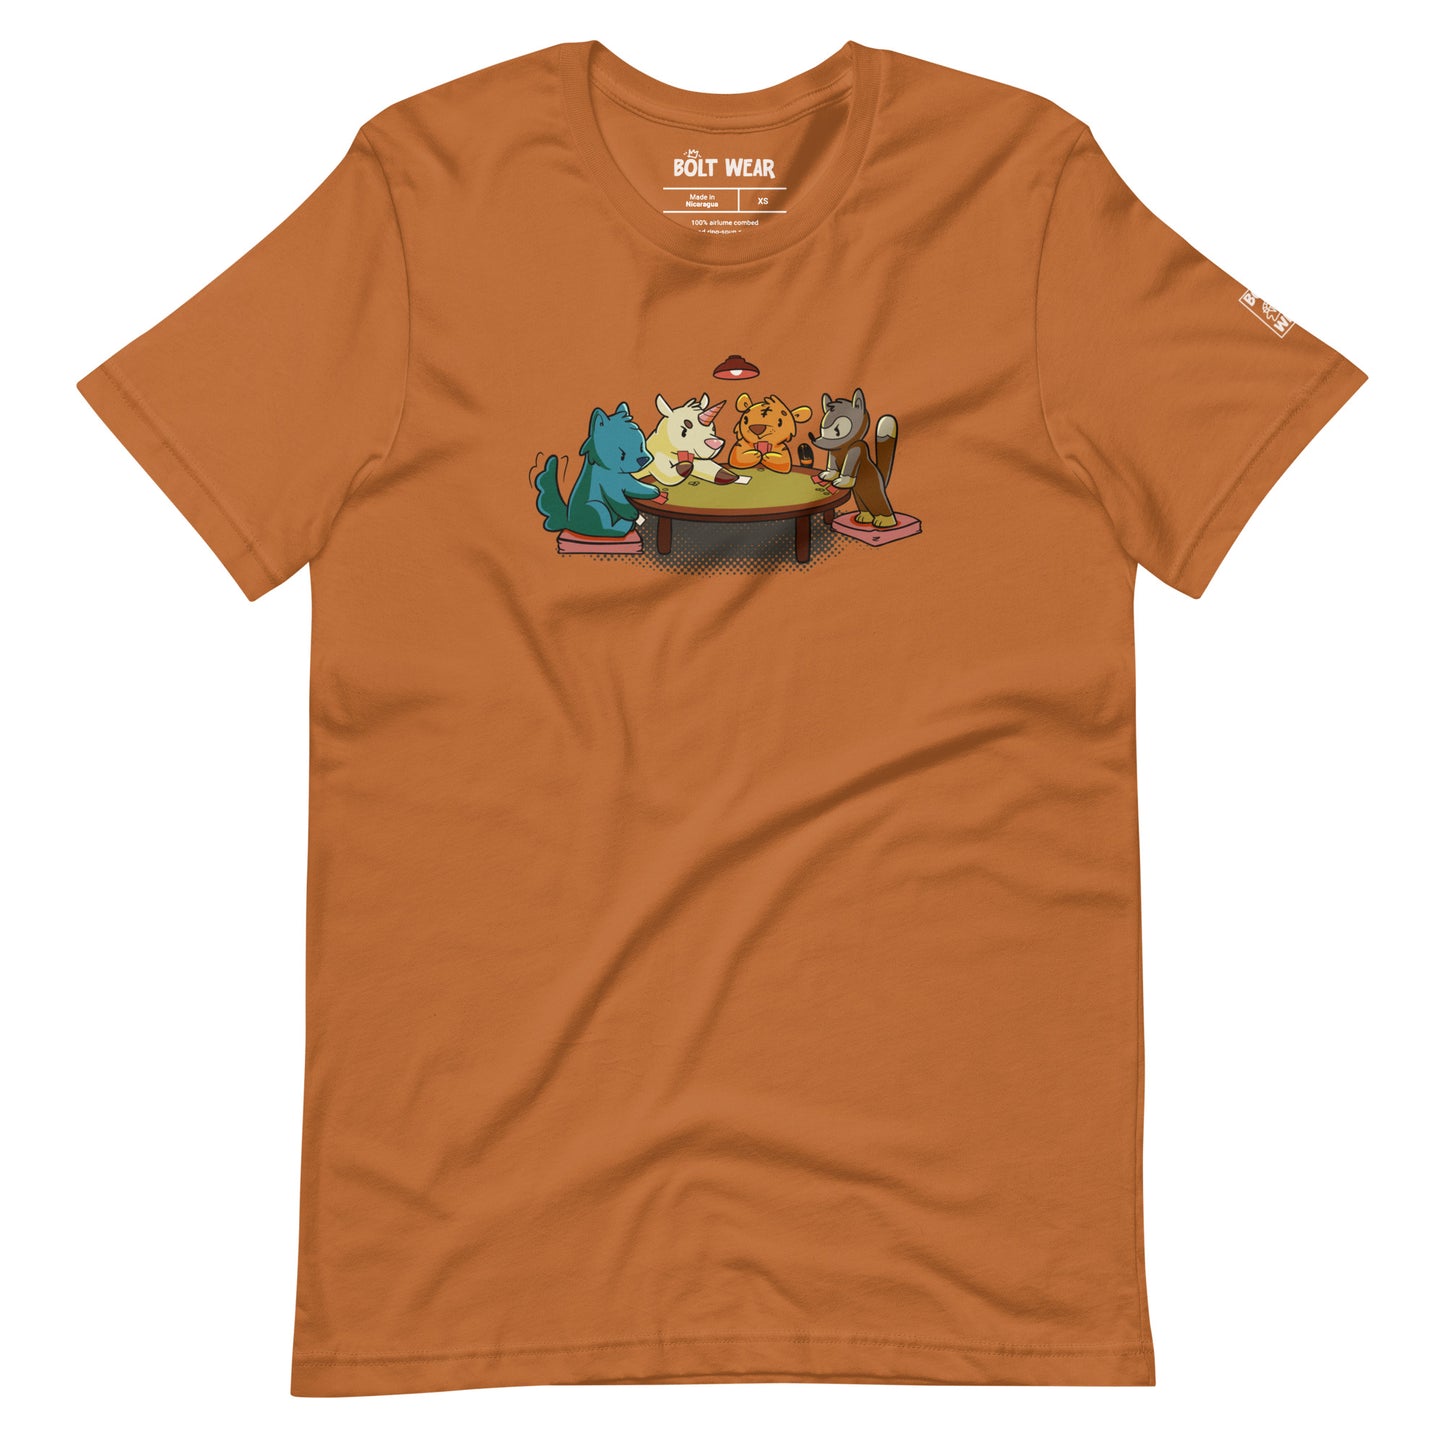 Dusty Orange t-shirt featuring 4 animals, a wolf, a unicorn, a tiger, and a racoon, playing cards around a table